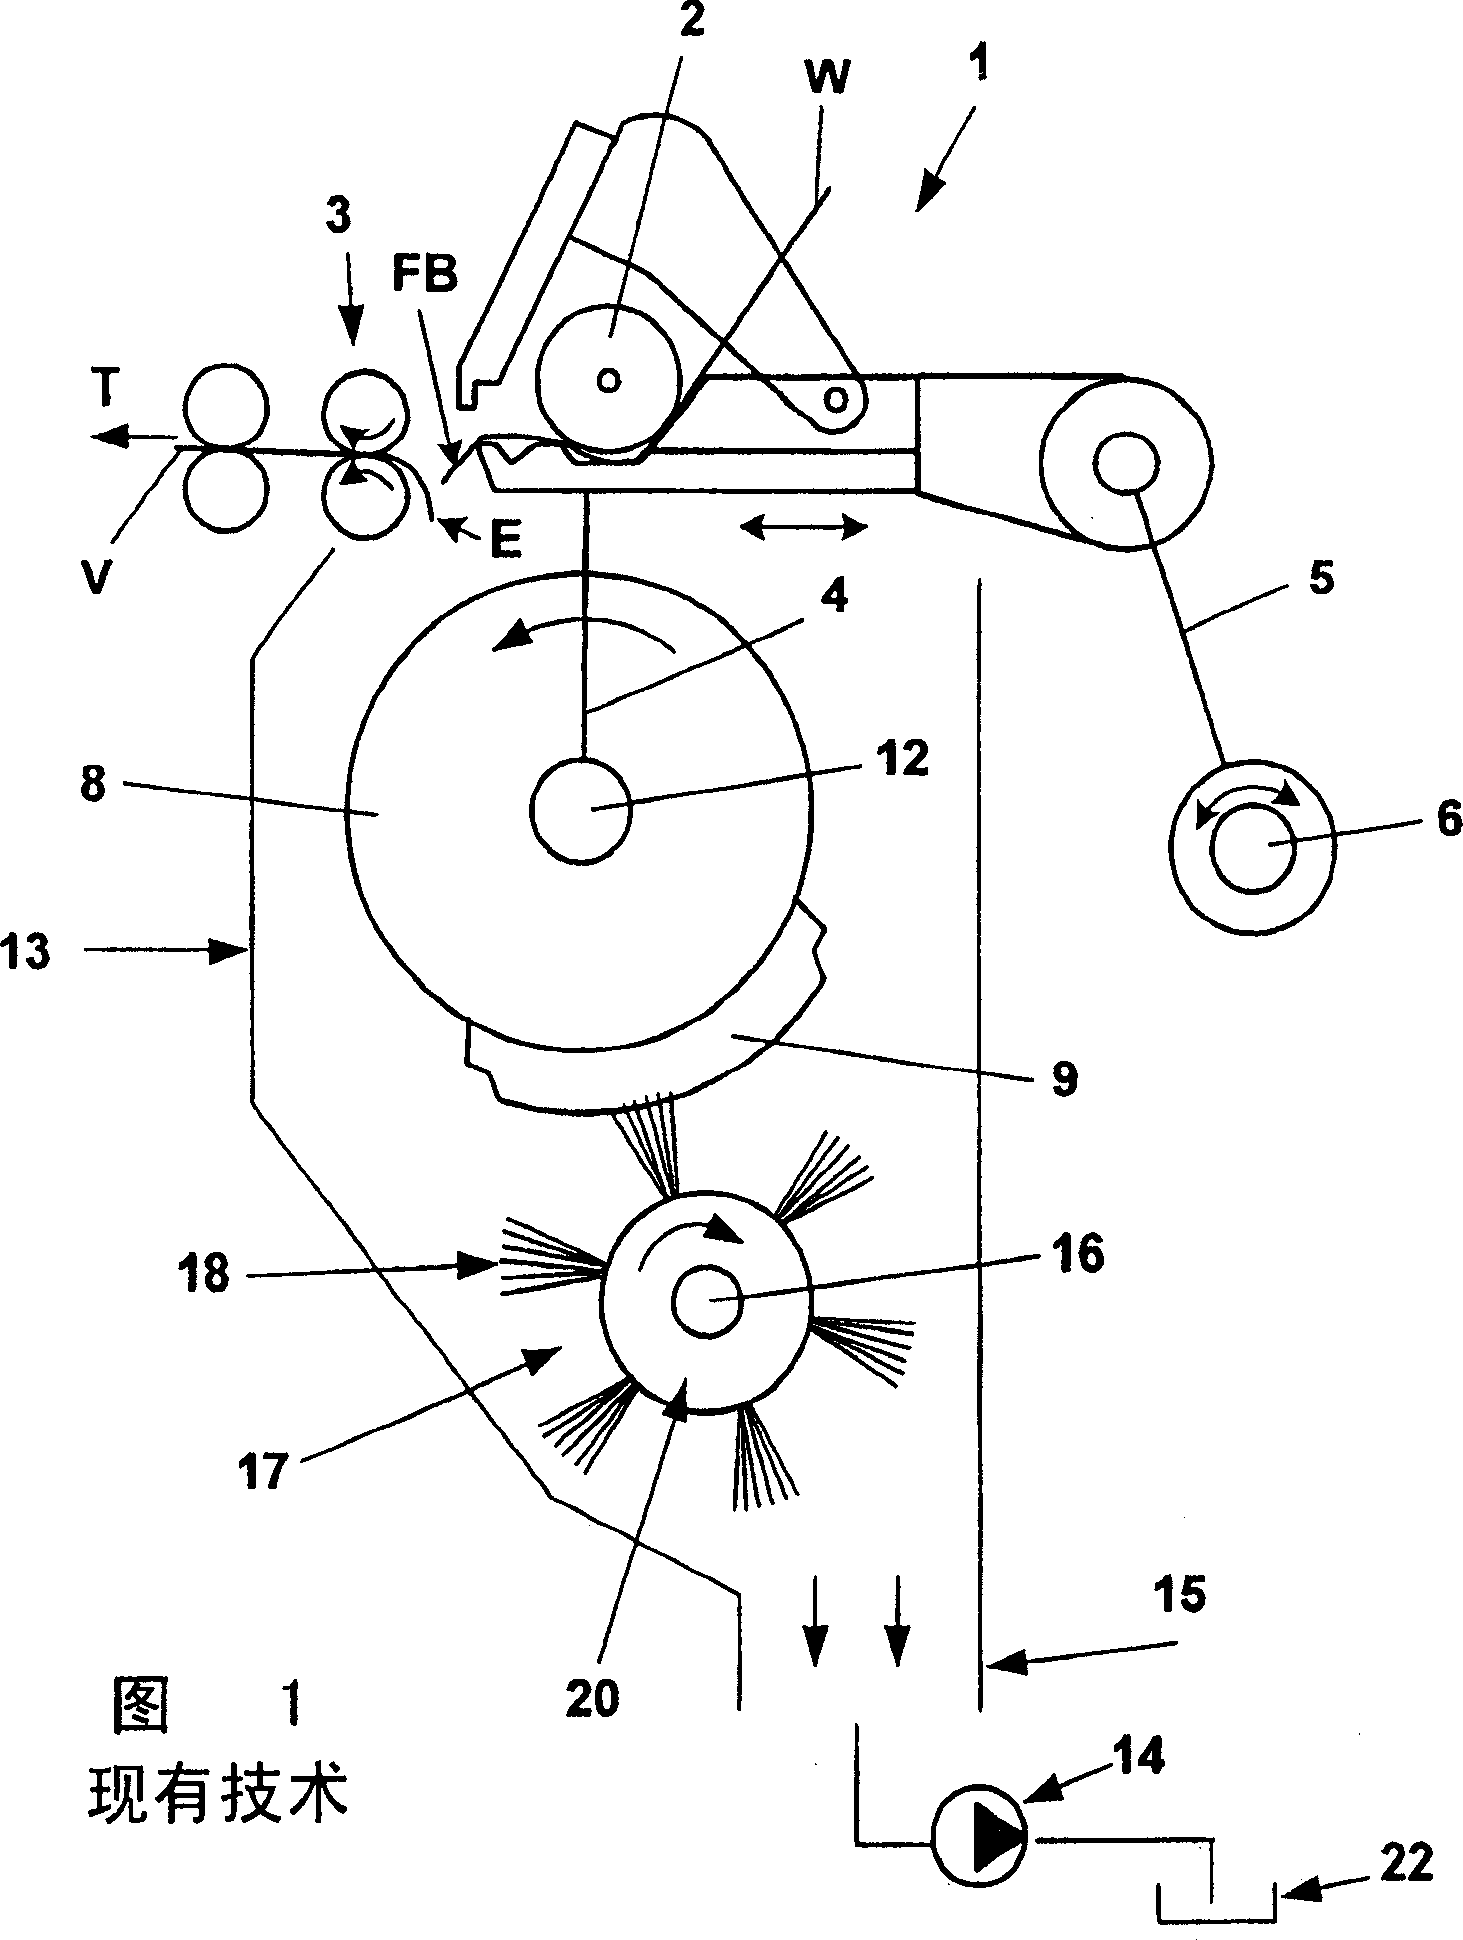 Device for cleaning a combing segment in a combing machine